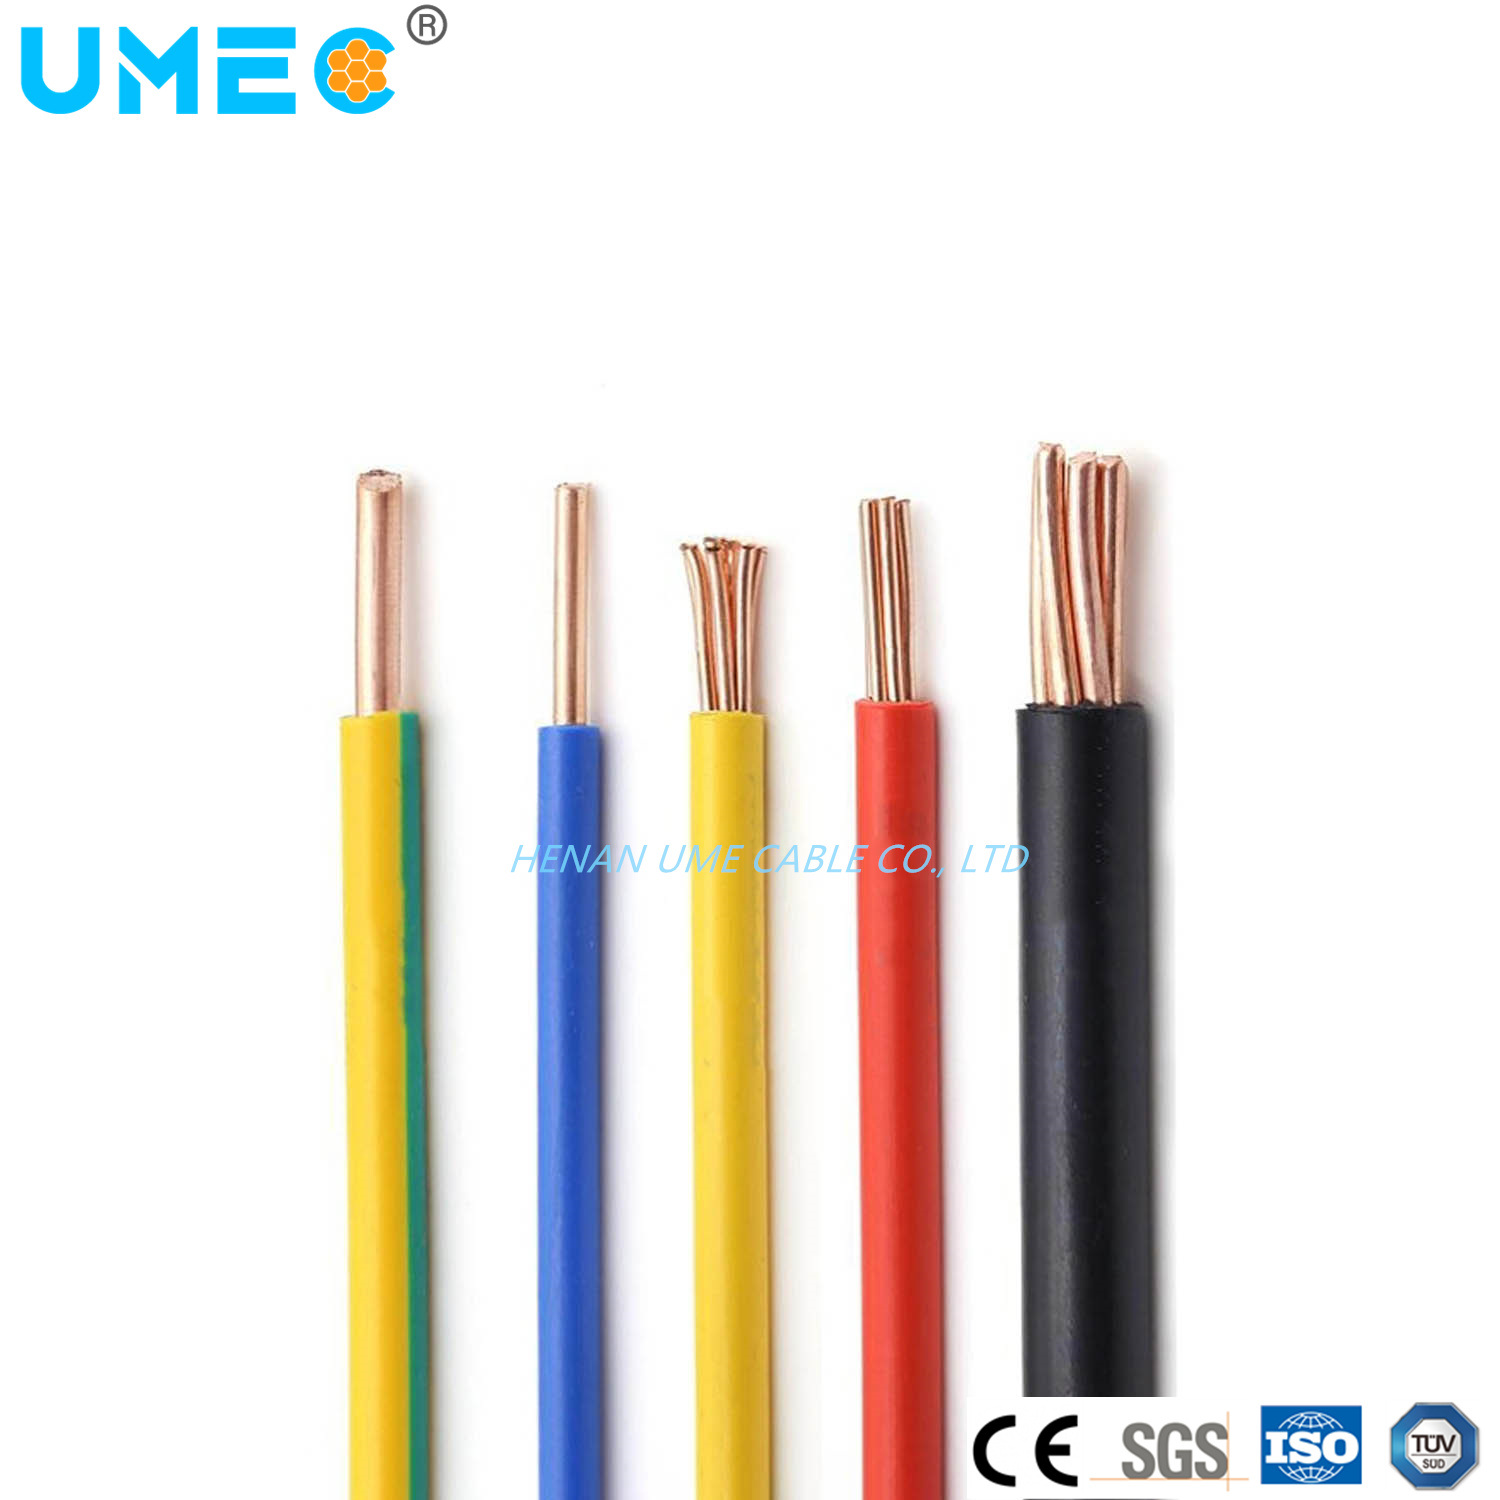 Multicore Copper Wire PVC Electrical Wire Flexible Wire and Cable Building Wire H07V-U